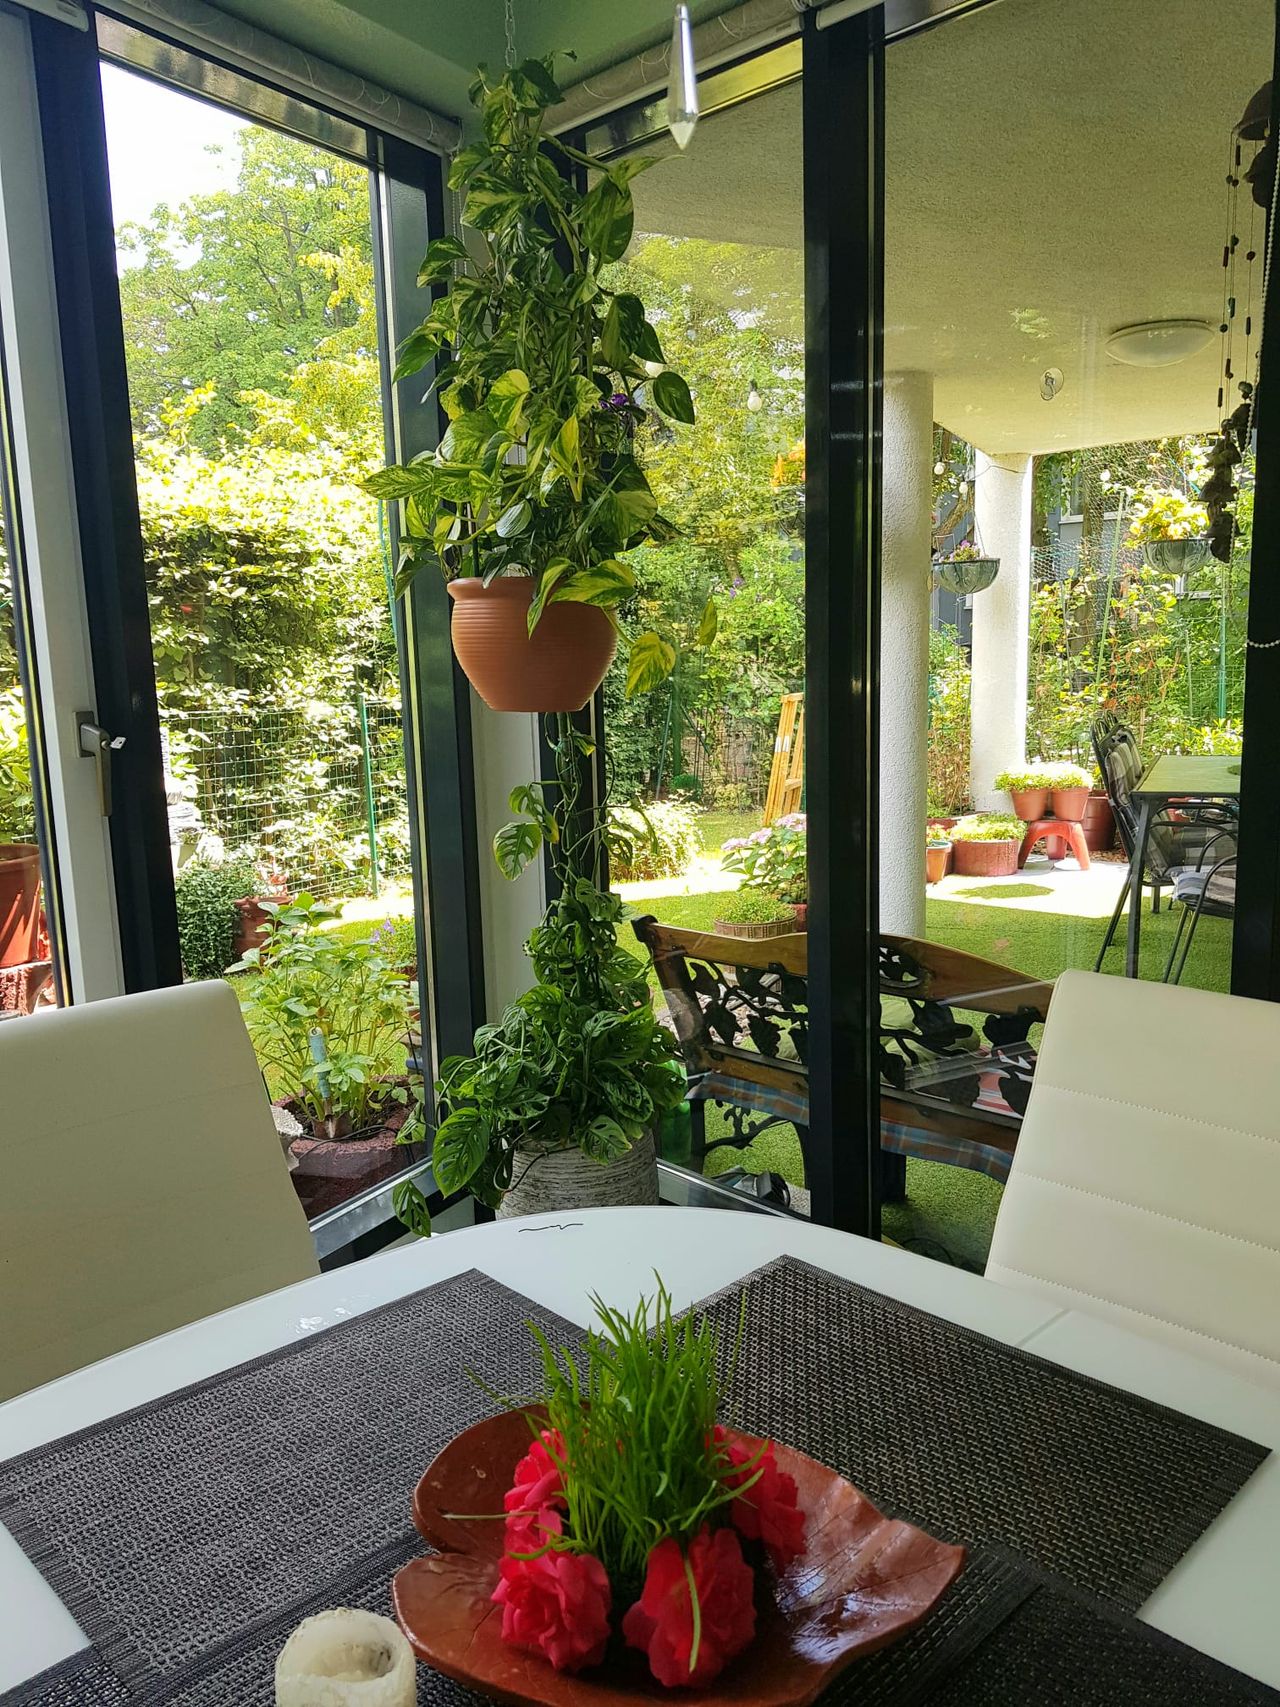 Great, spacious apartment with private terrace, 5 min away from Tempelhofer Harbour